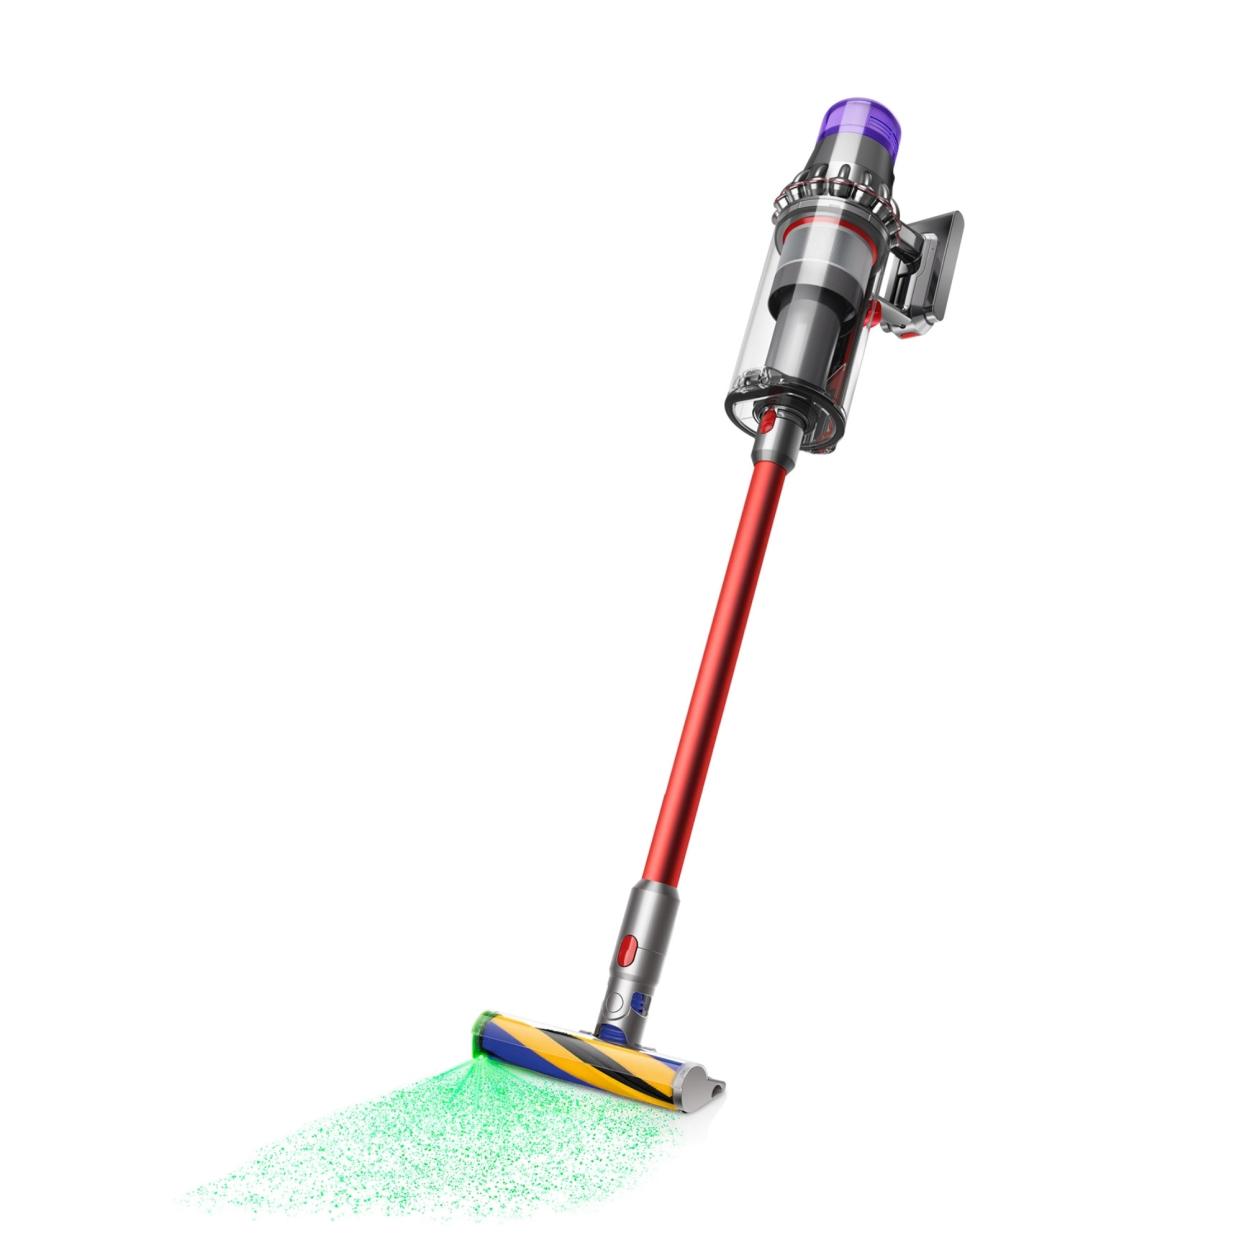 Dyson Outsize+ Cordless Vacuum Cleaner (Overstock / Overstock)